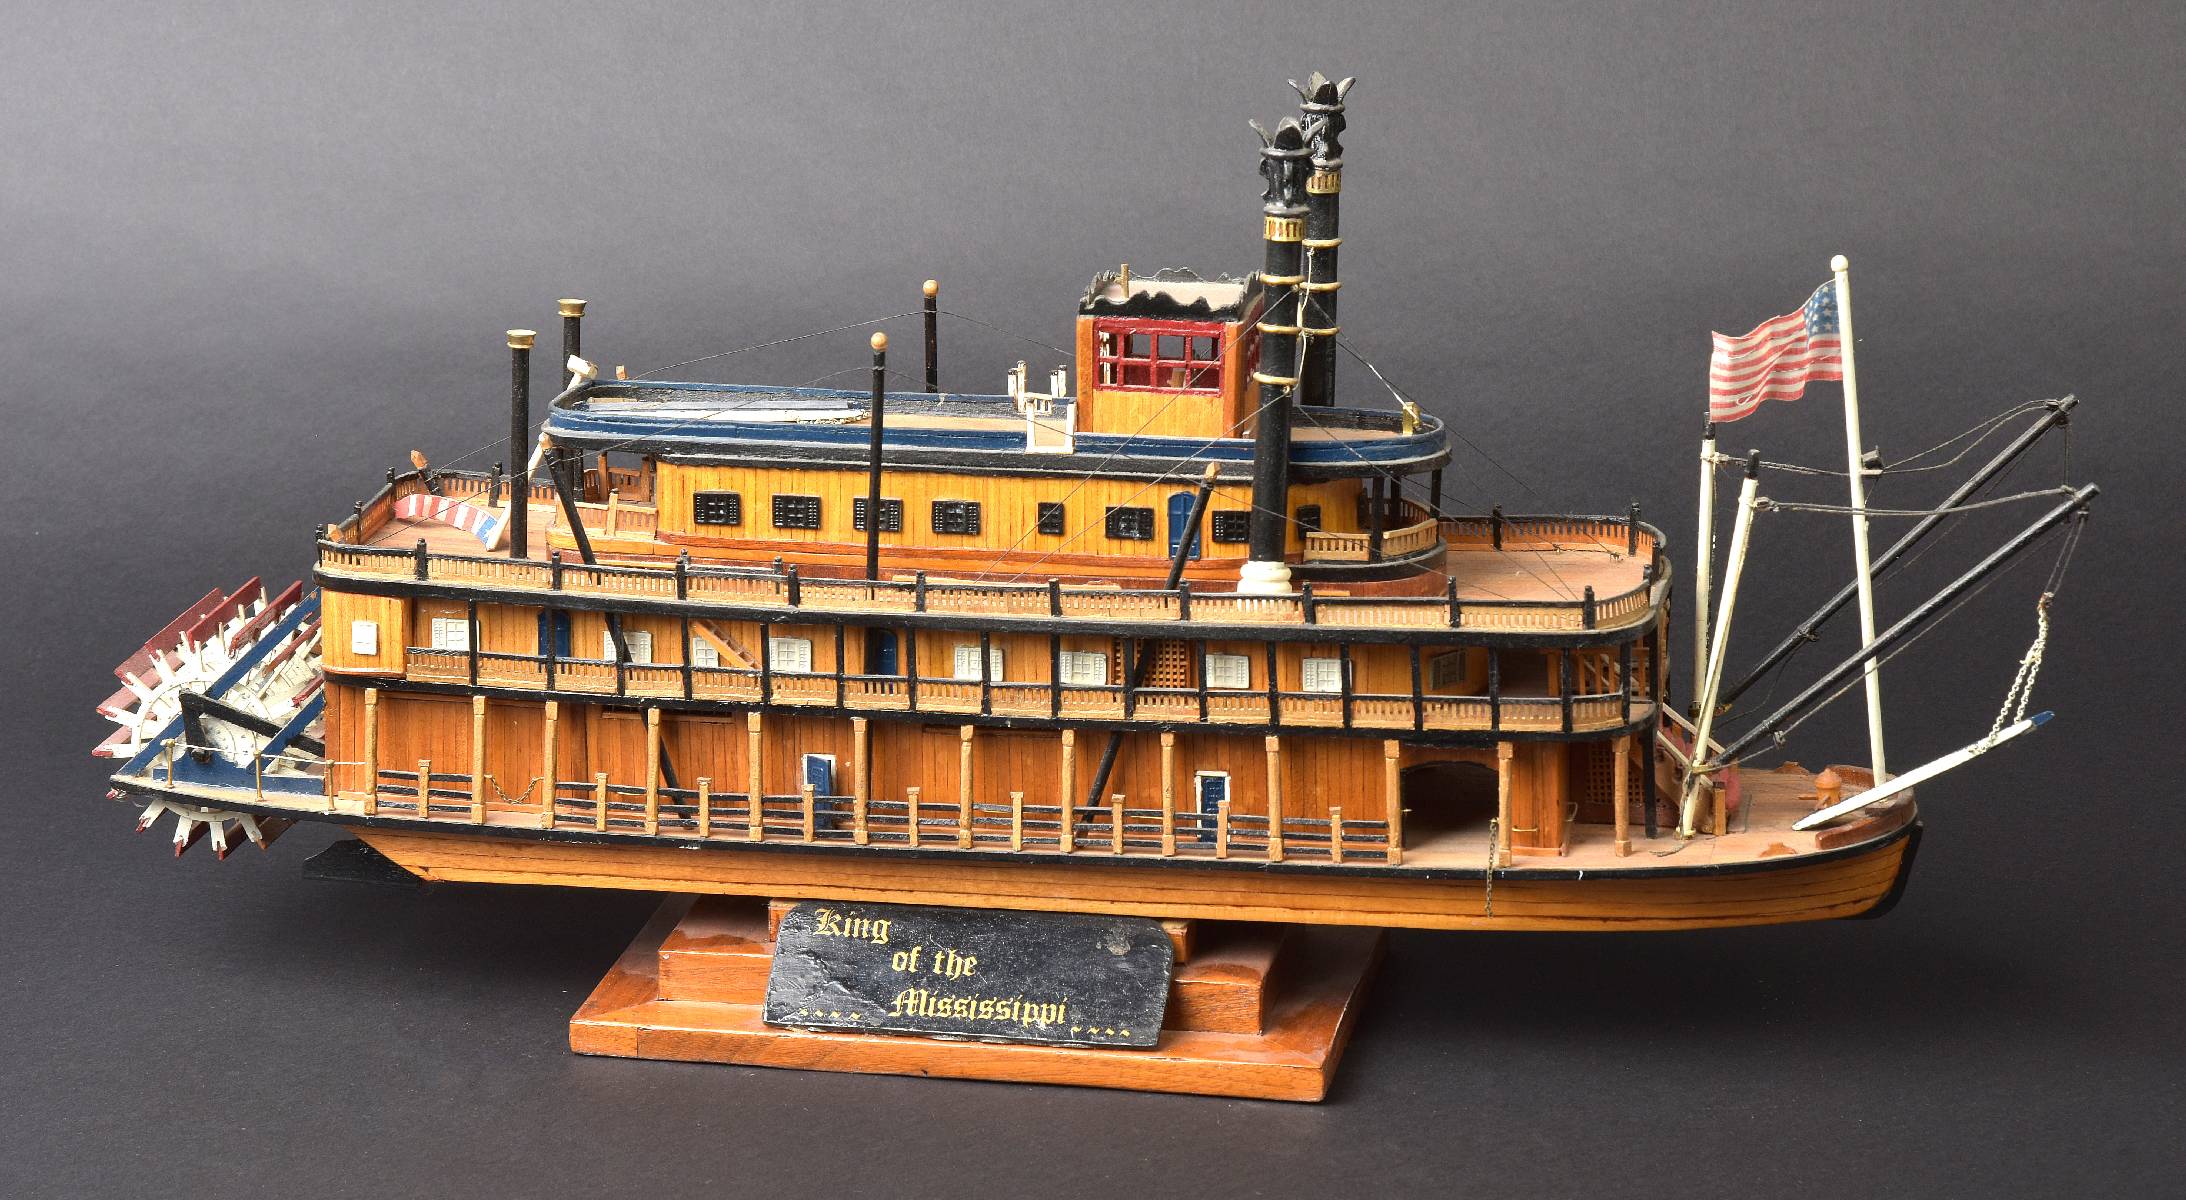 *Model Ship. Wooden scale model of the paddle steamer 'King of the Mississippi', with deck